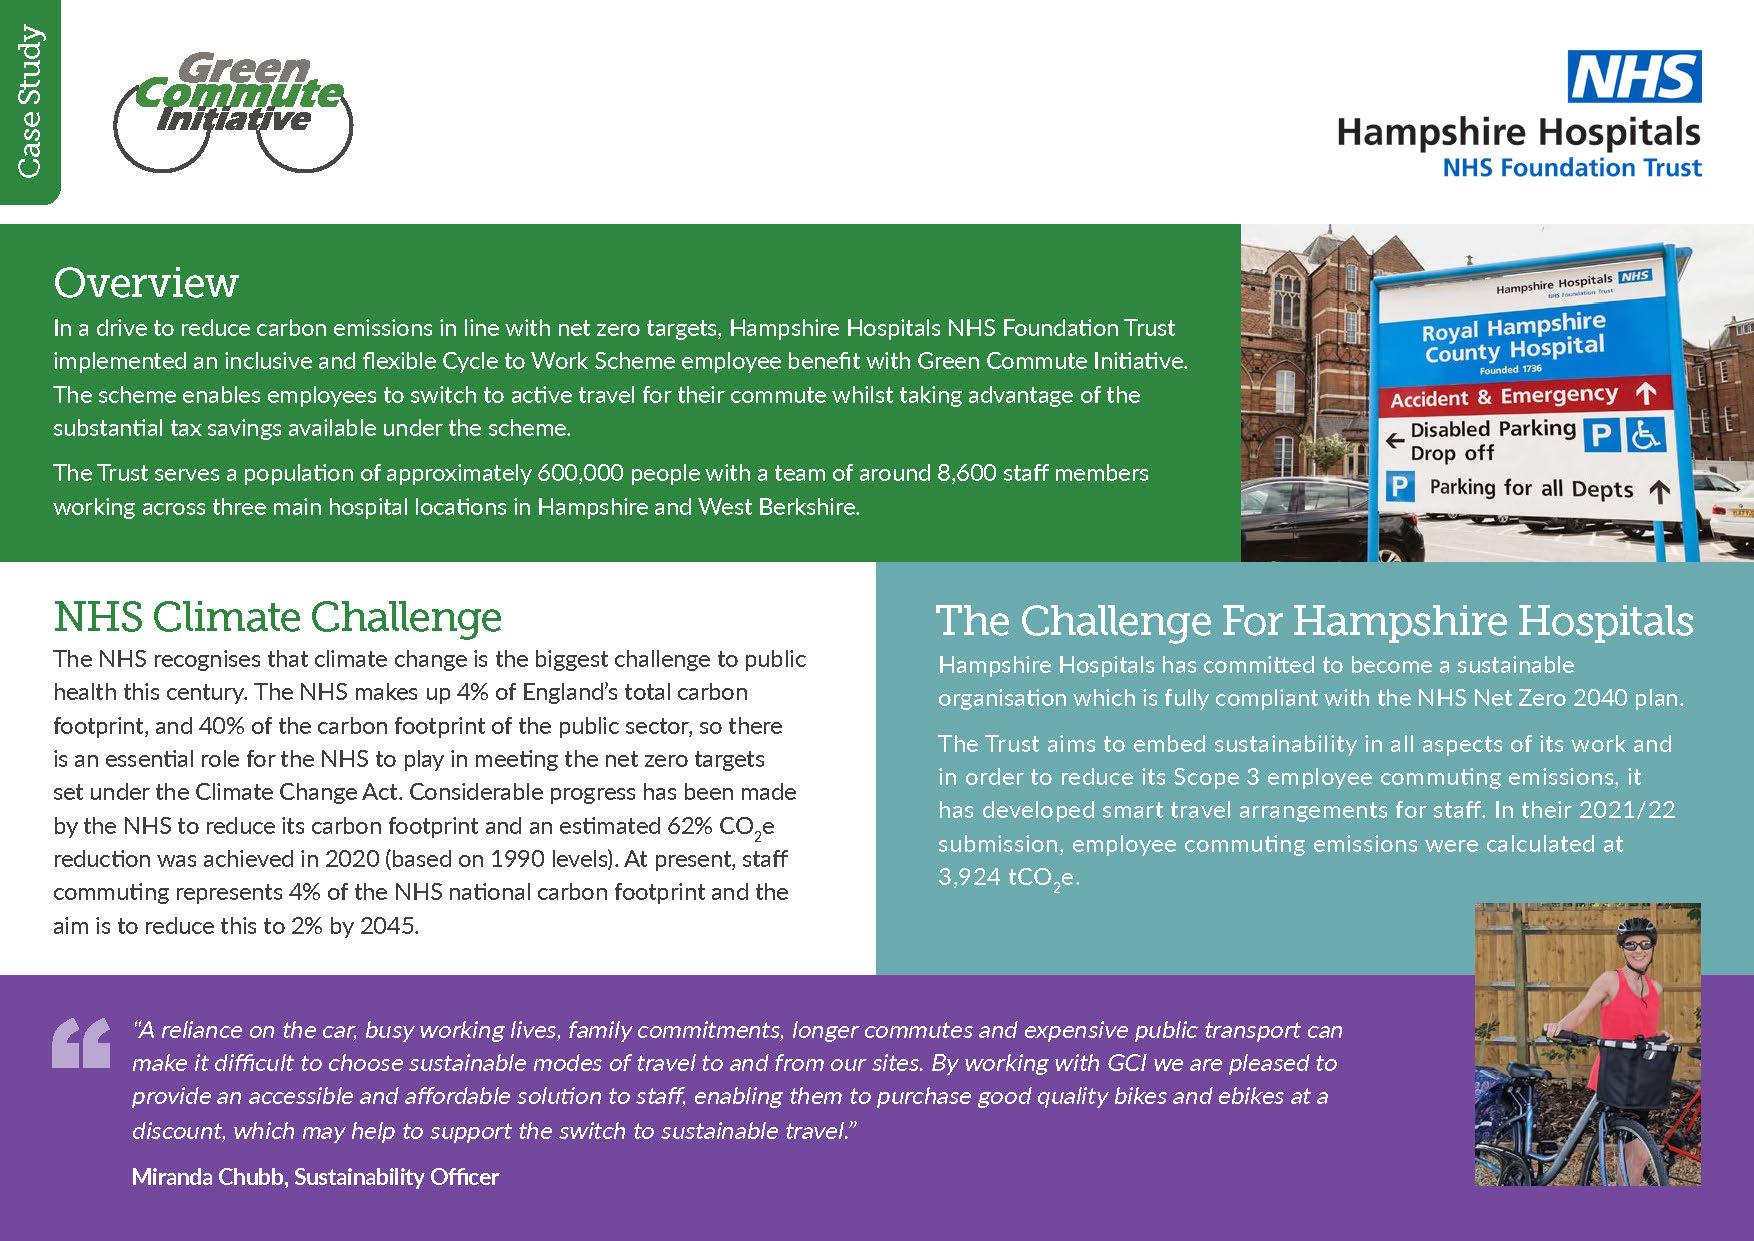 Find out how Hampshire Hospitals NHS Foundation Trust implemented an inclusive and flexible Cycle to Work Scheme employee benefits with Green Commute Initiative